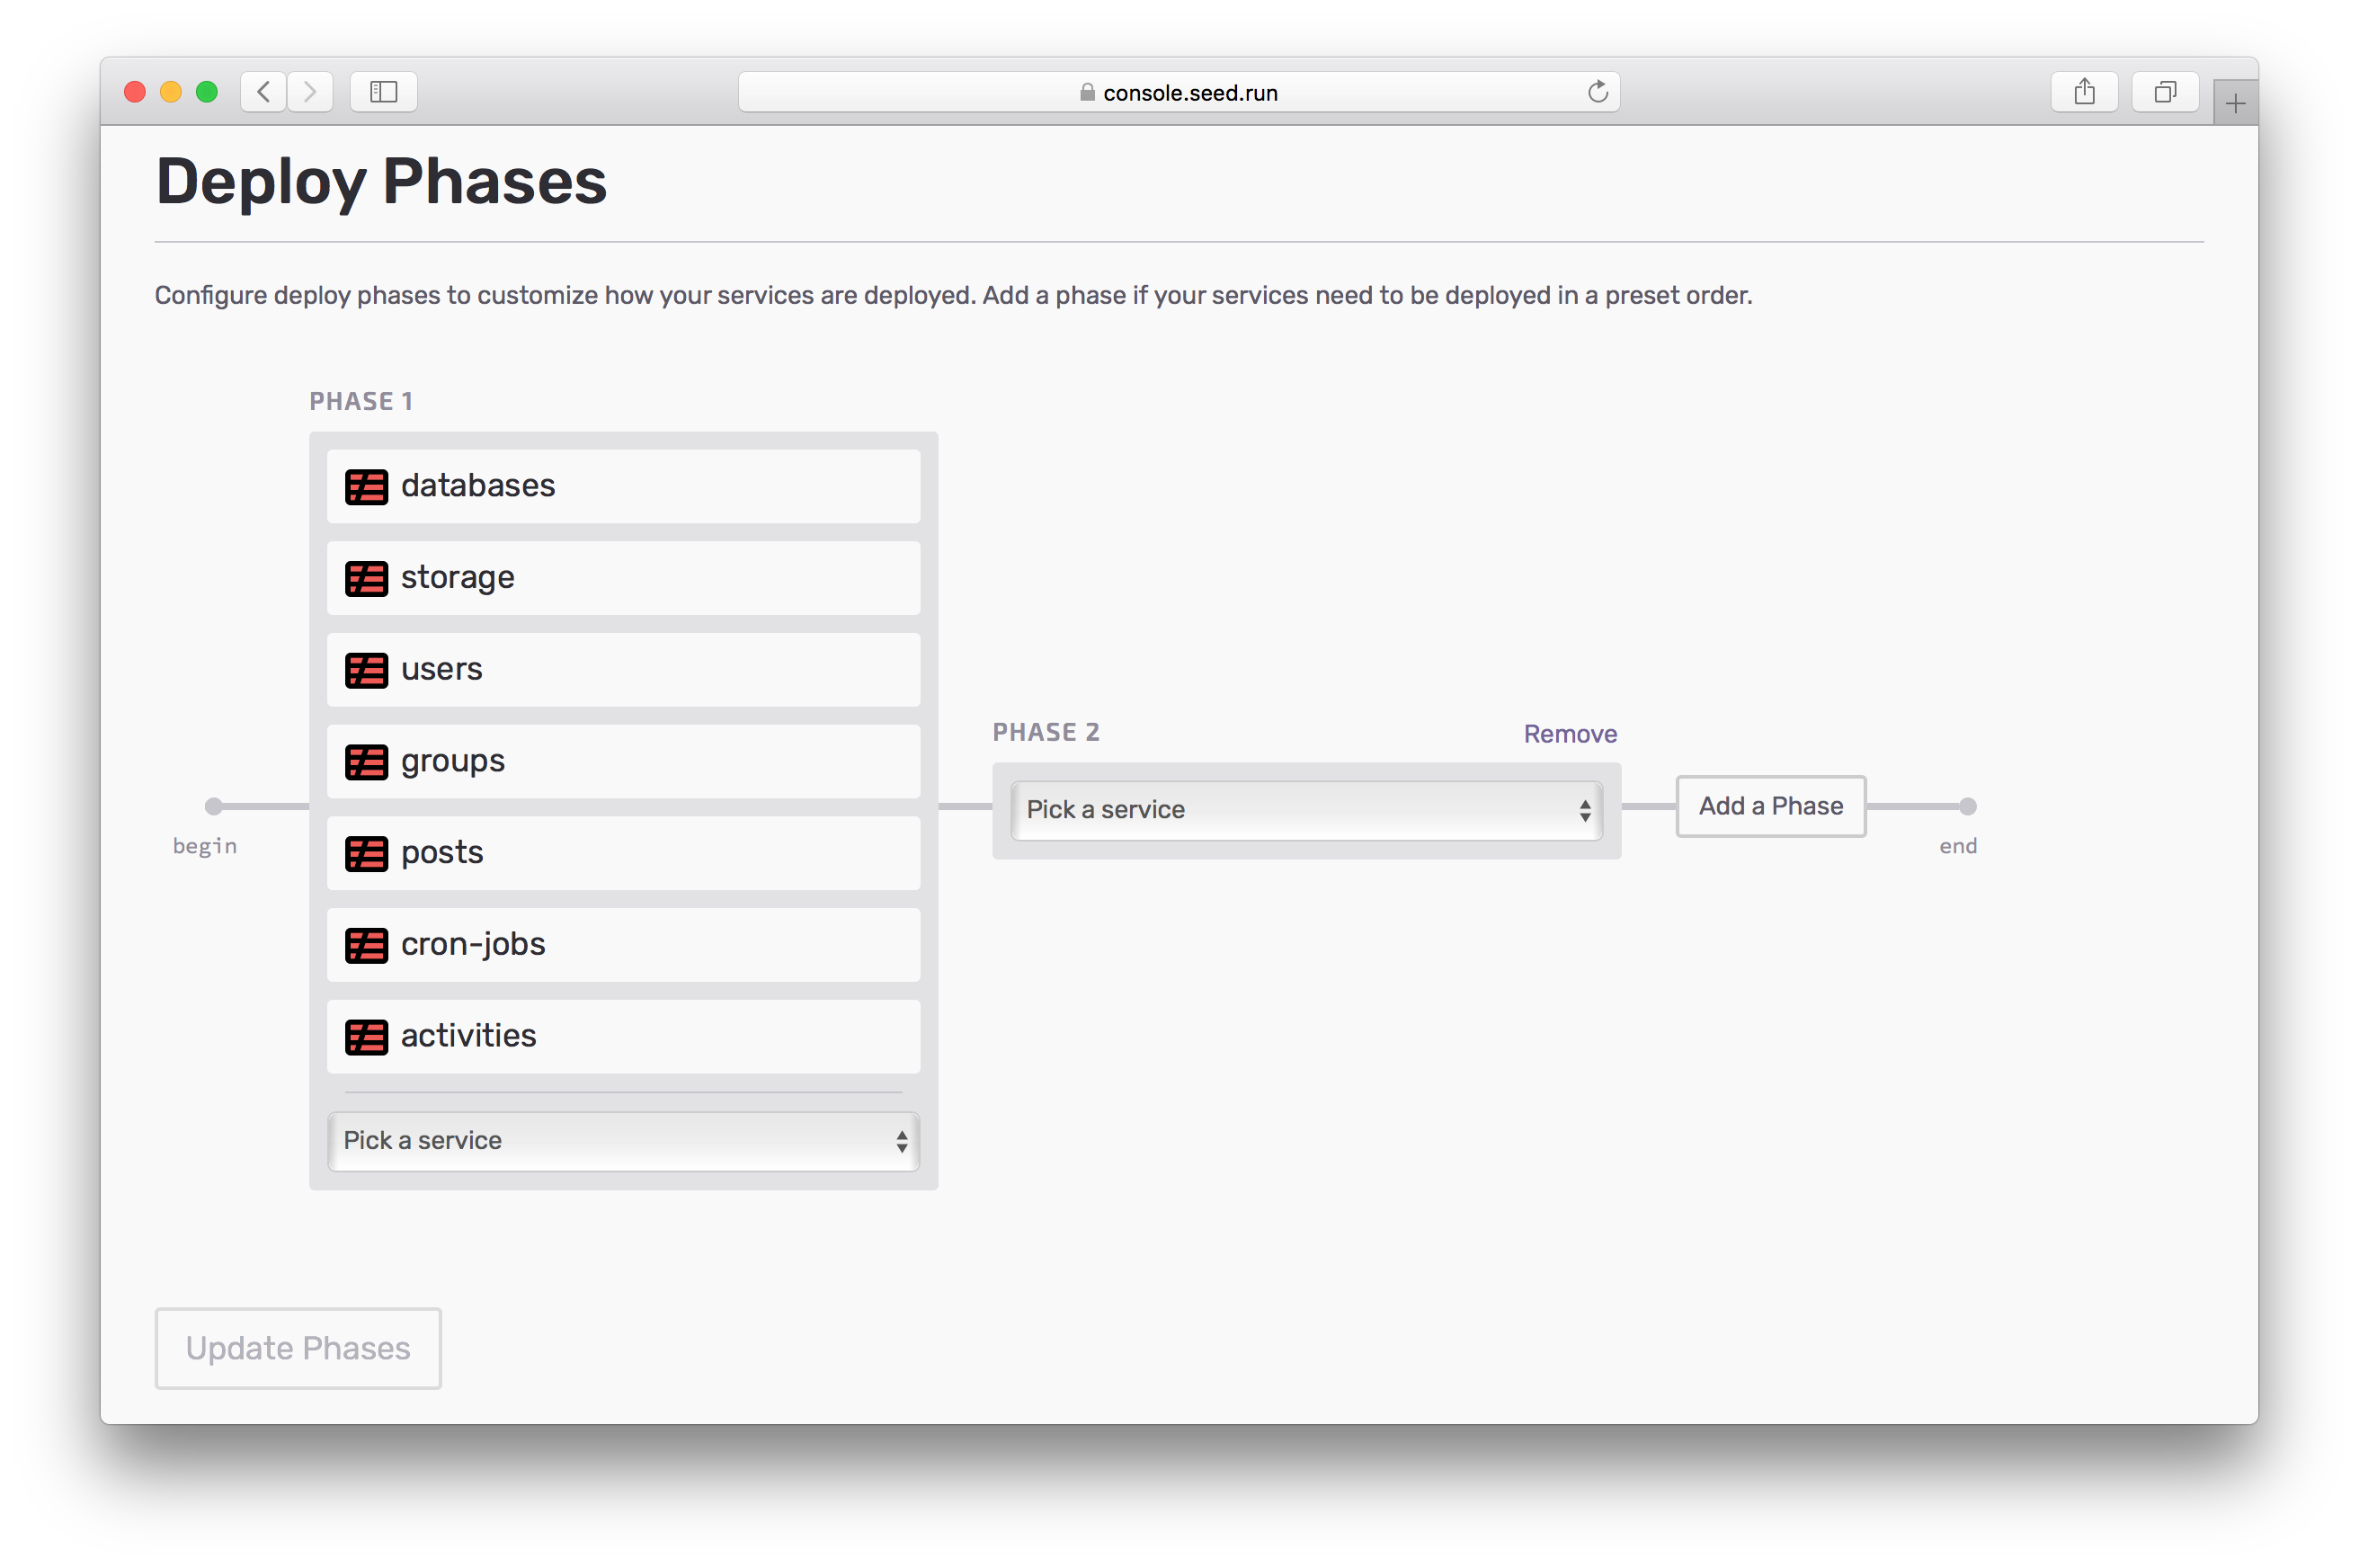 Configure new Deploy Phases